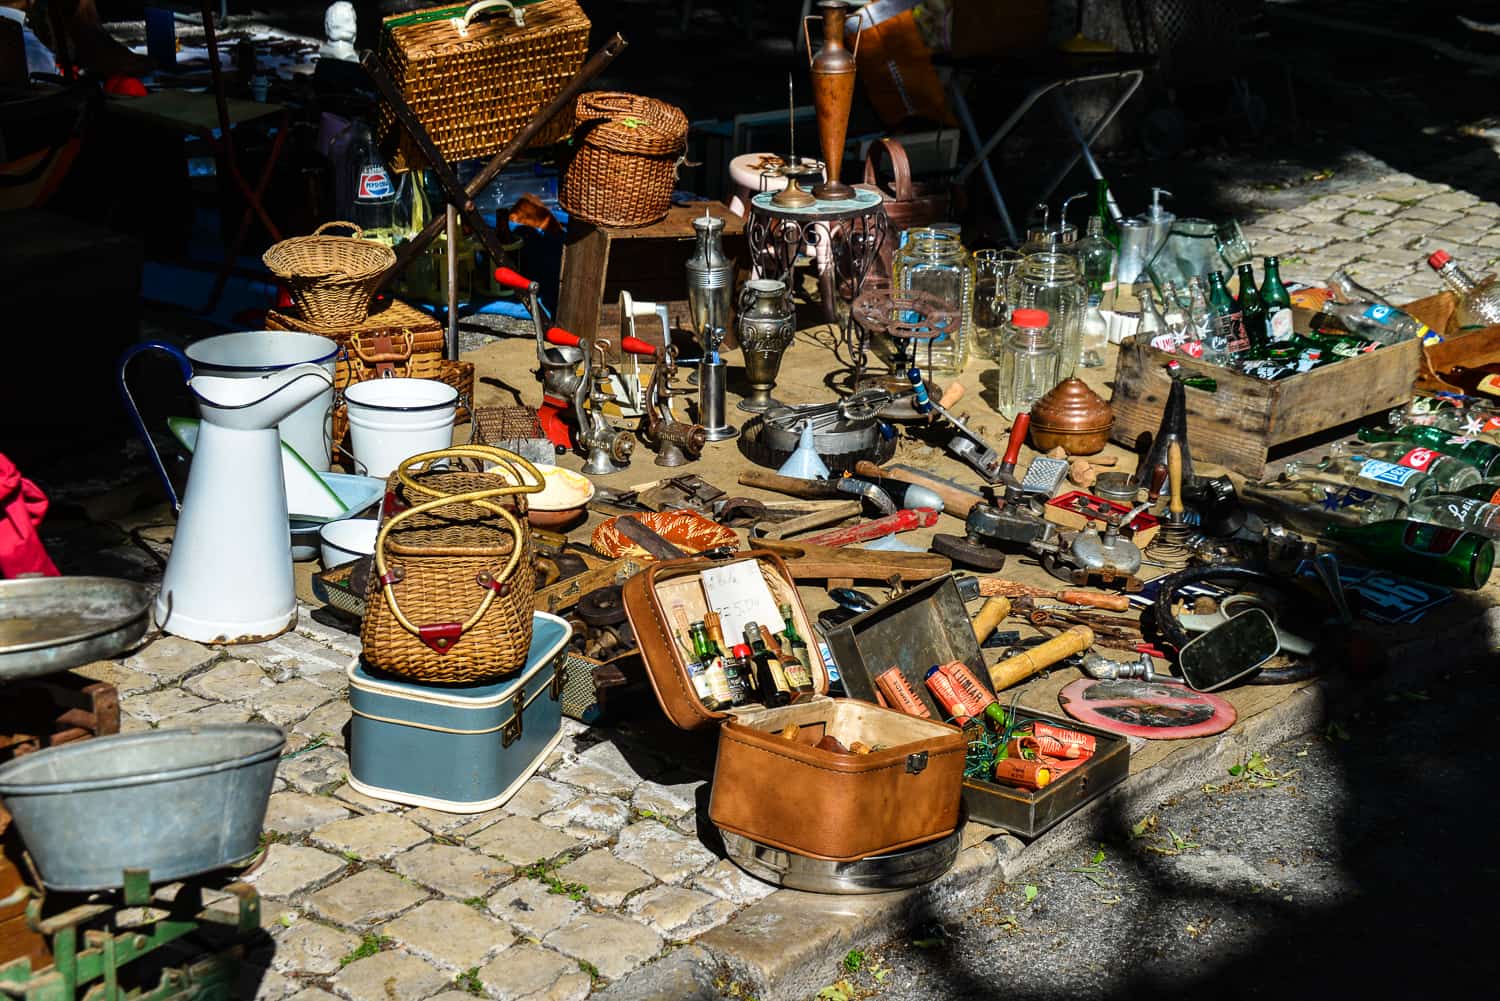 This really is a flea market with stalls selling everything you can imagine ...